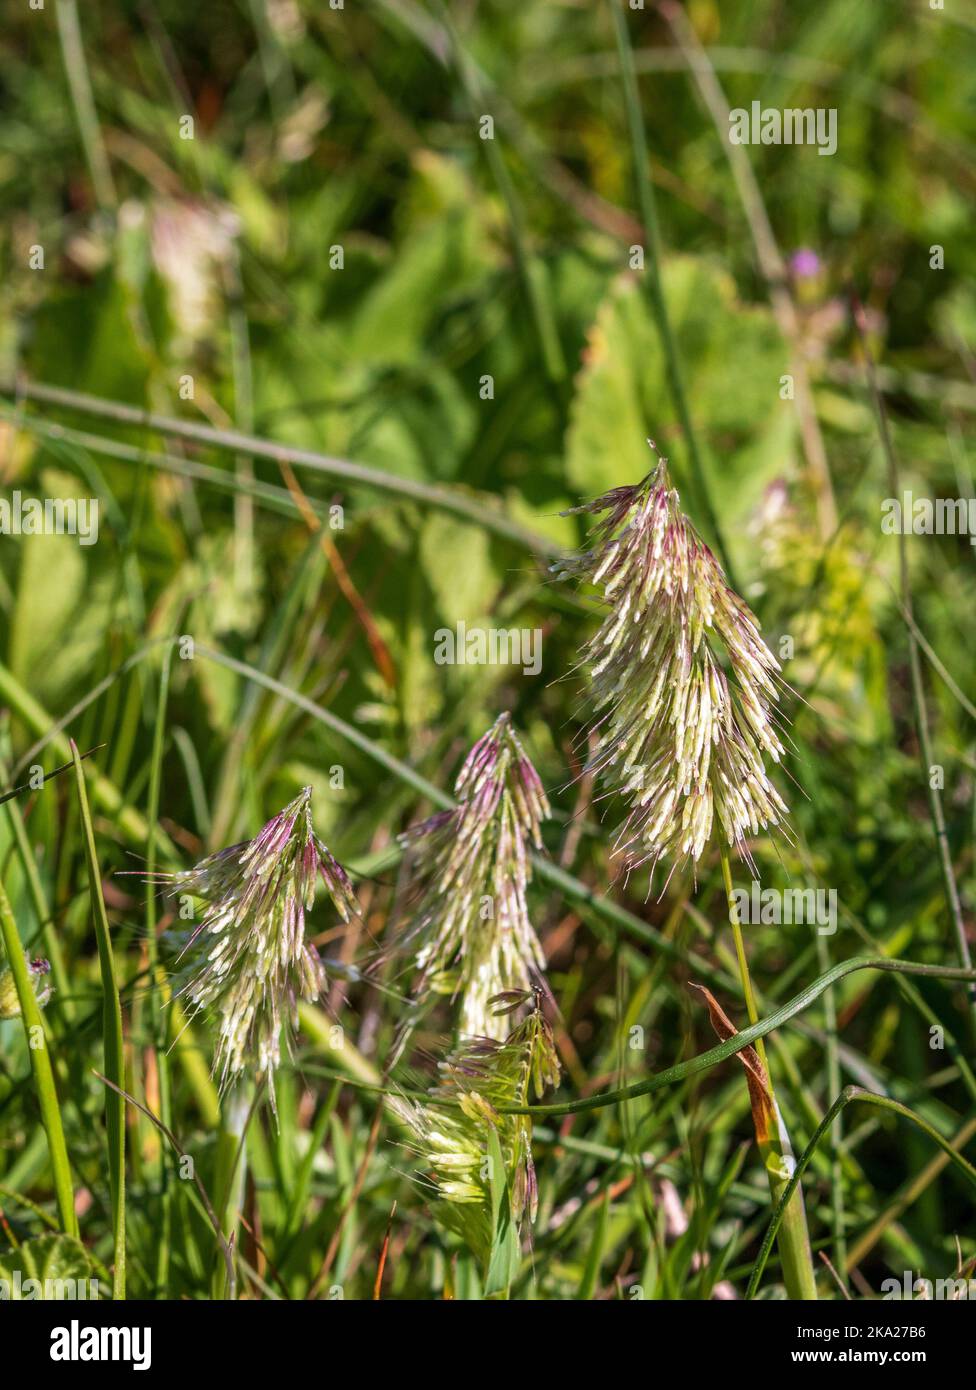 Lamarckia aurea, Golden top Grass with copy space and a Natural background in portrait mode Stock Photo